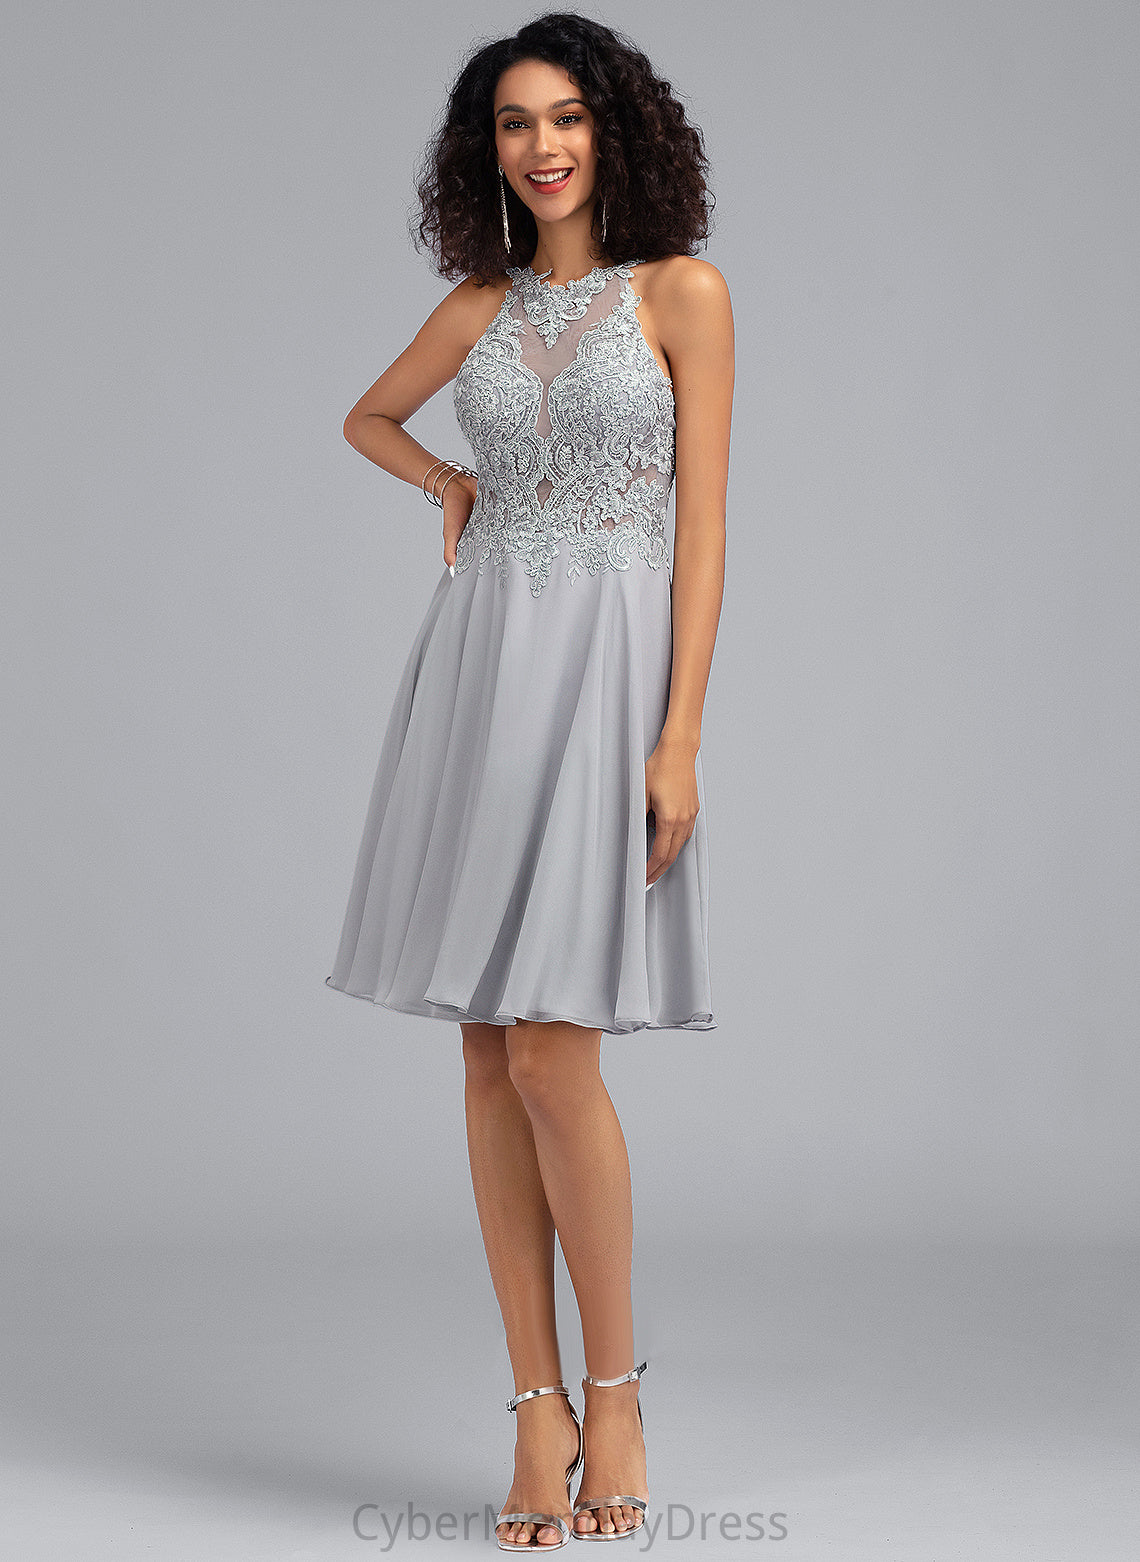 Sequins Cocktail Dress Lace Cocktail Dresses Knee-Length With Nicole Scoop Neck Chiffon A-Line